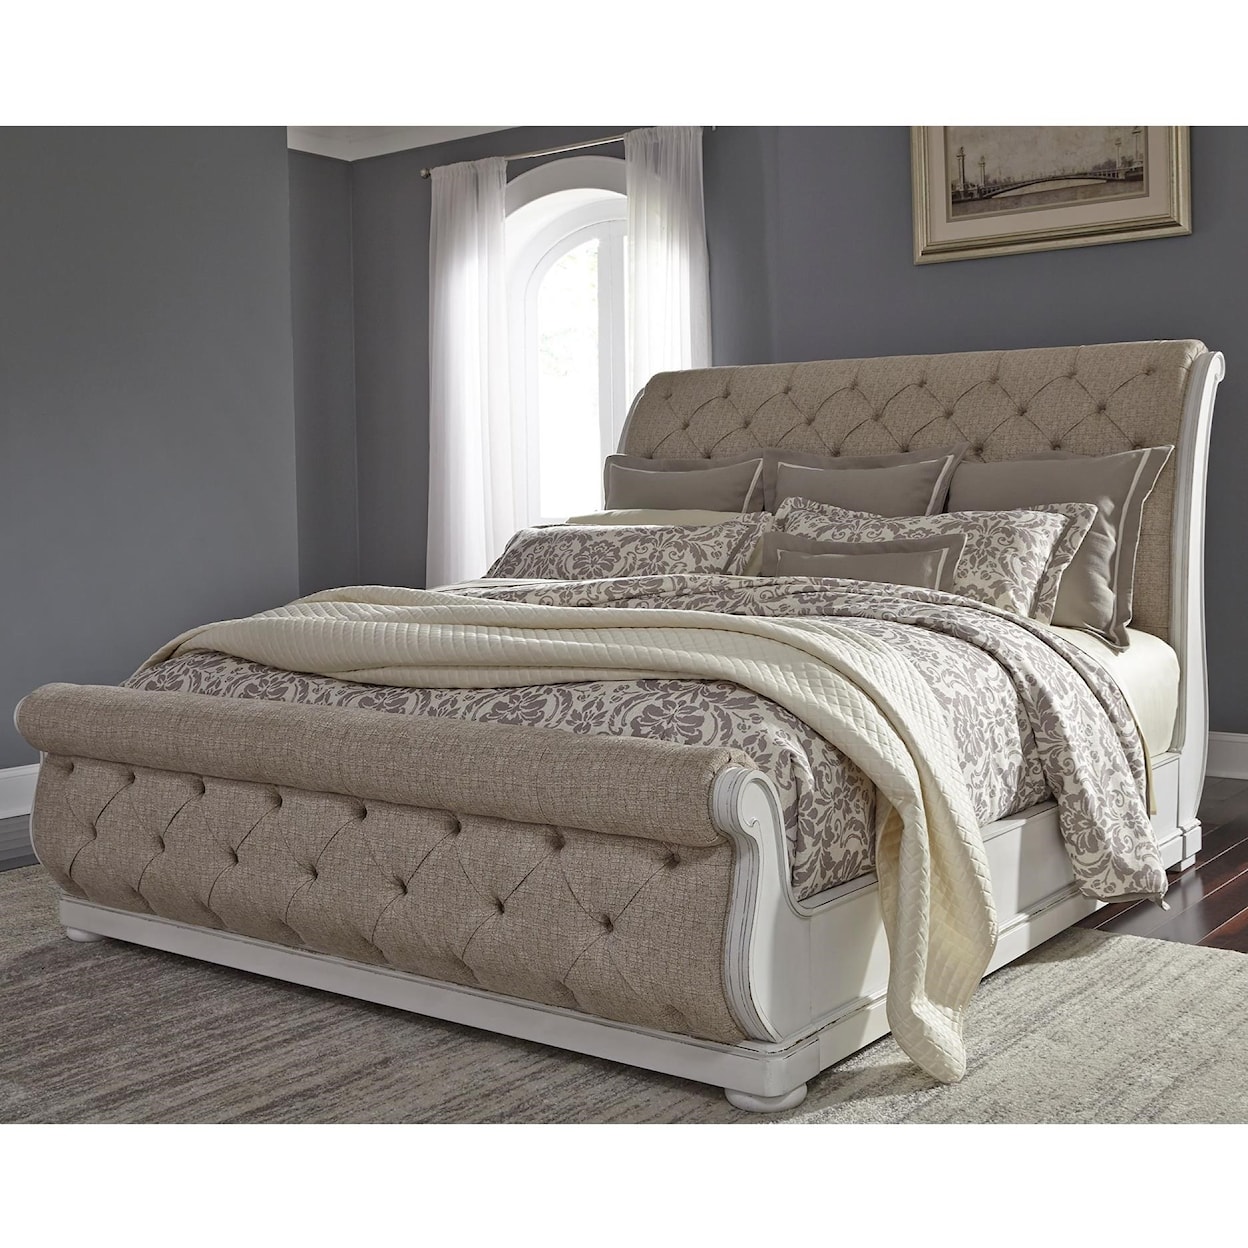 Liberty Furniture Abbey Park King Sleigh Bed